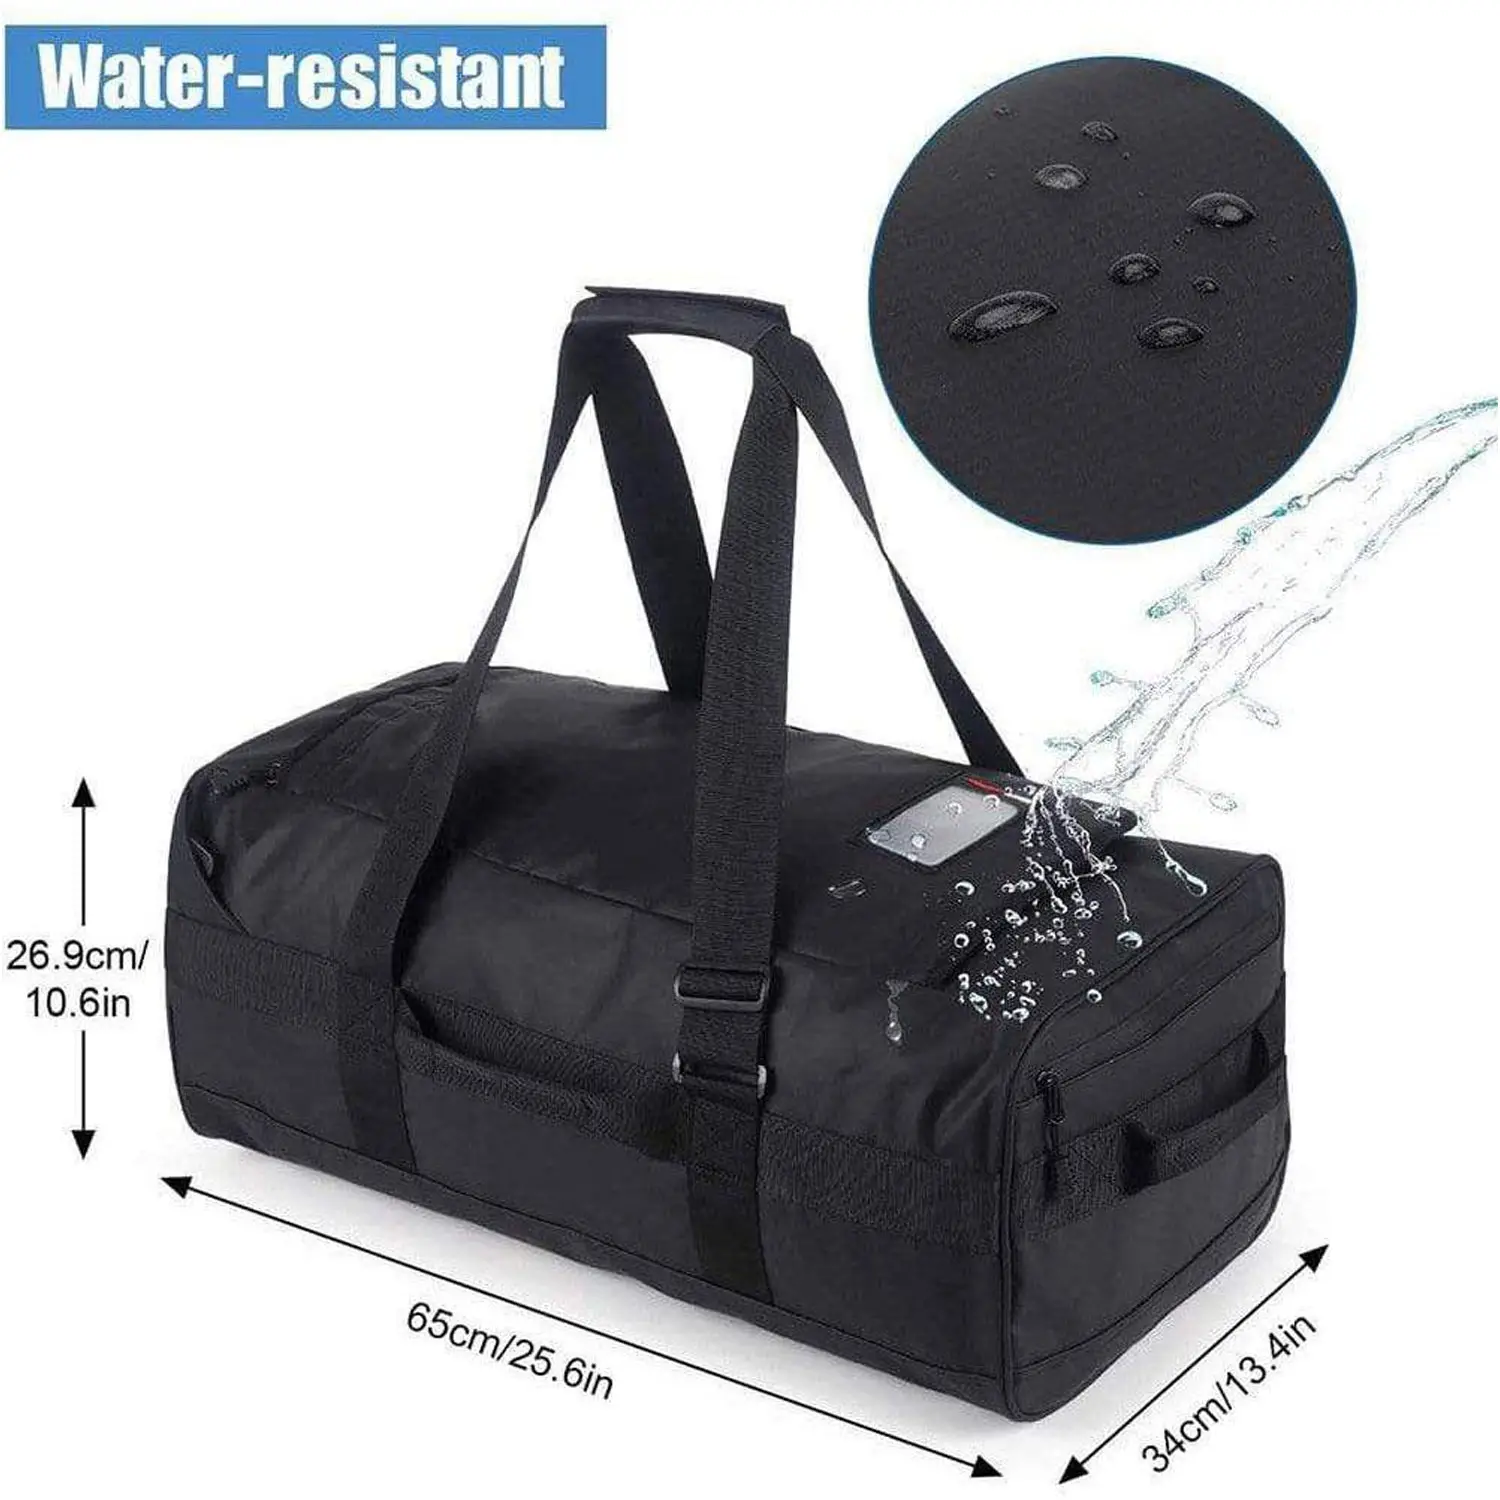 MIER Water Resistant Backpack Duffle Heavy Duty Convertible Duffle Bag